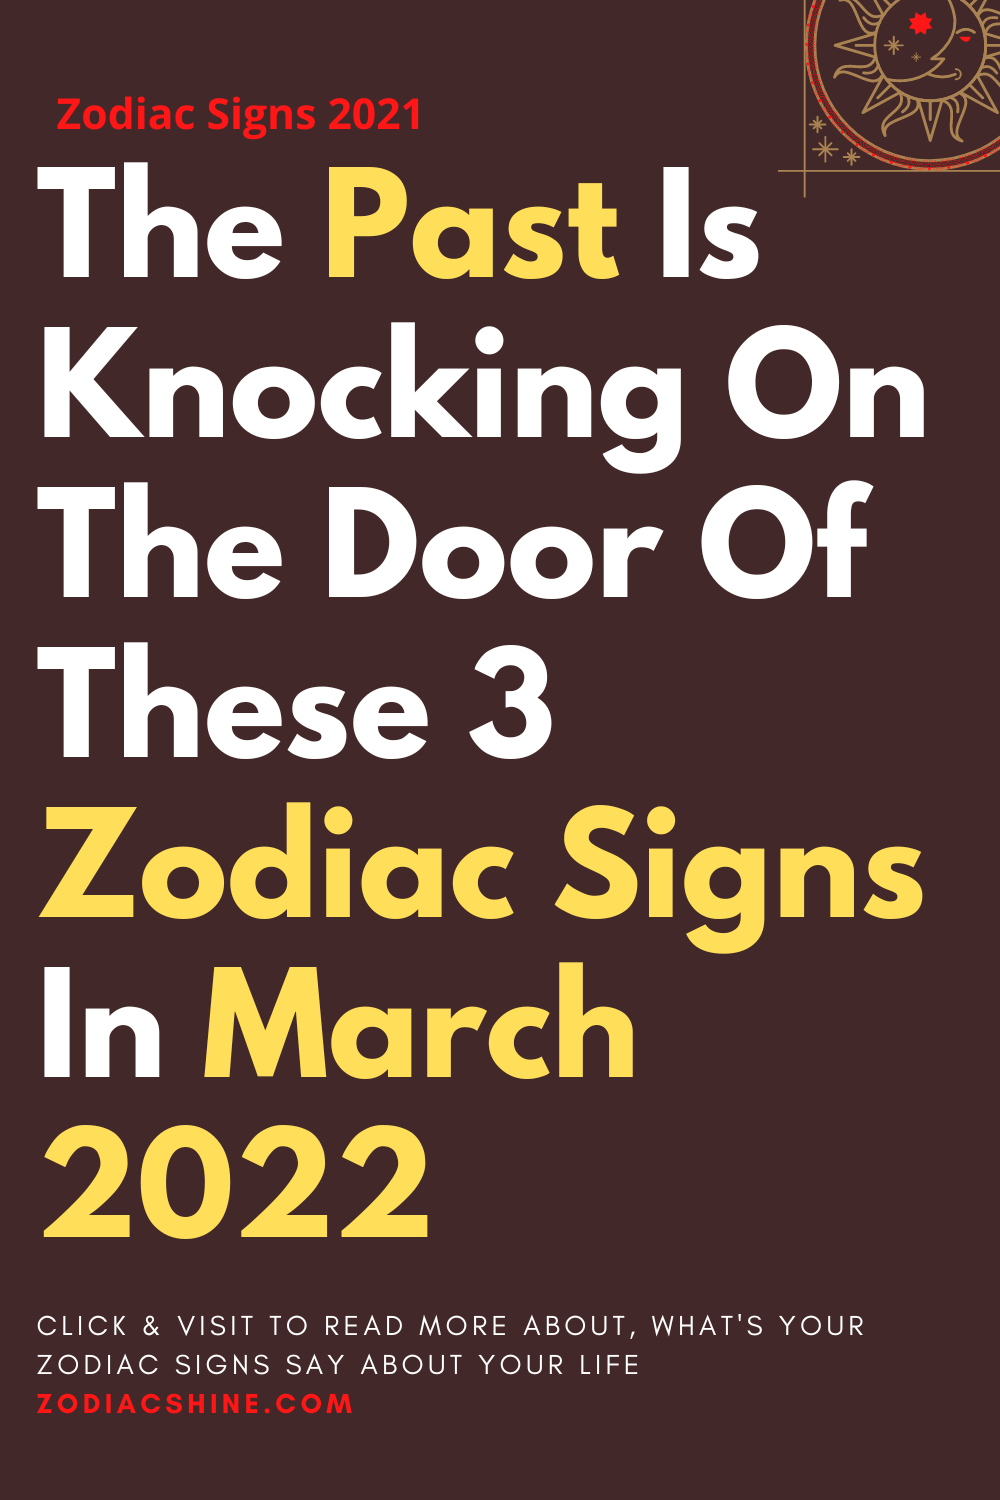 The Past Is Knocking On The Door Of These 3 Zodiac Signs In March 2022